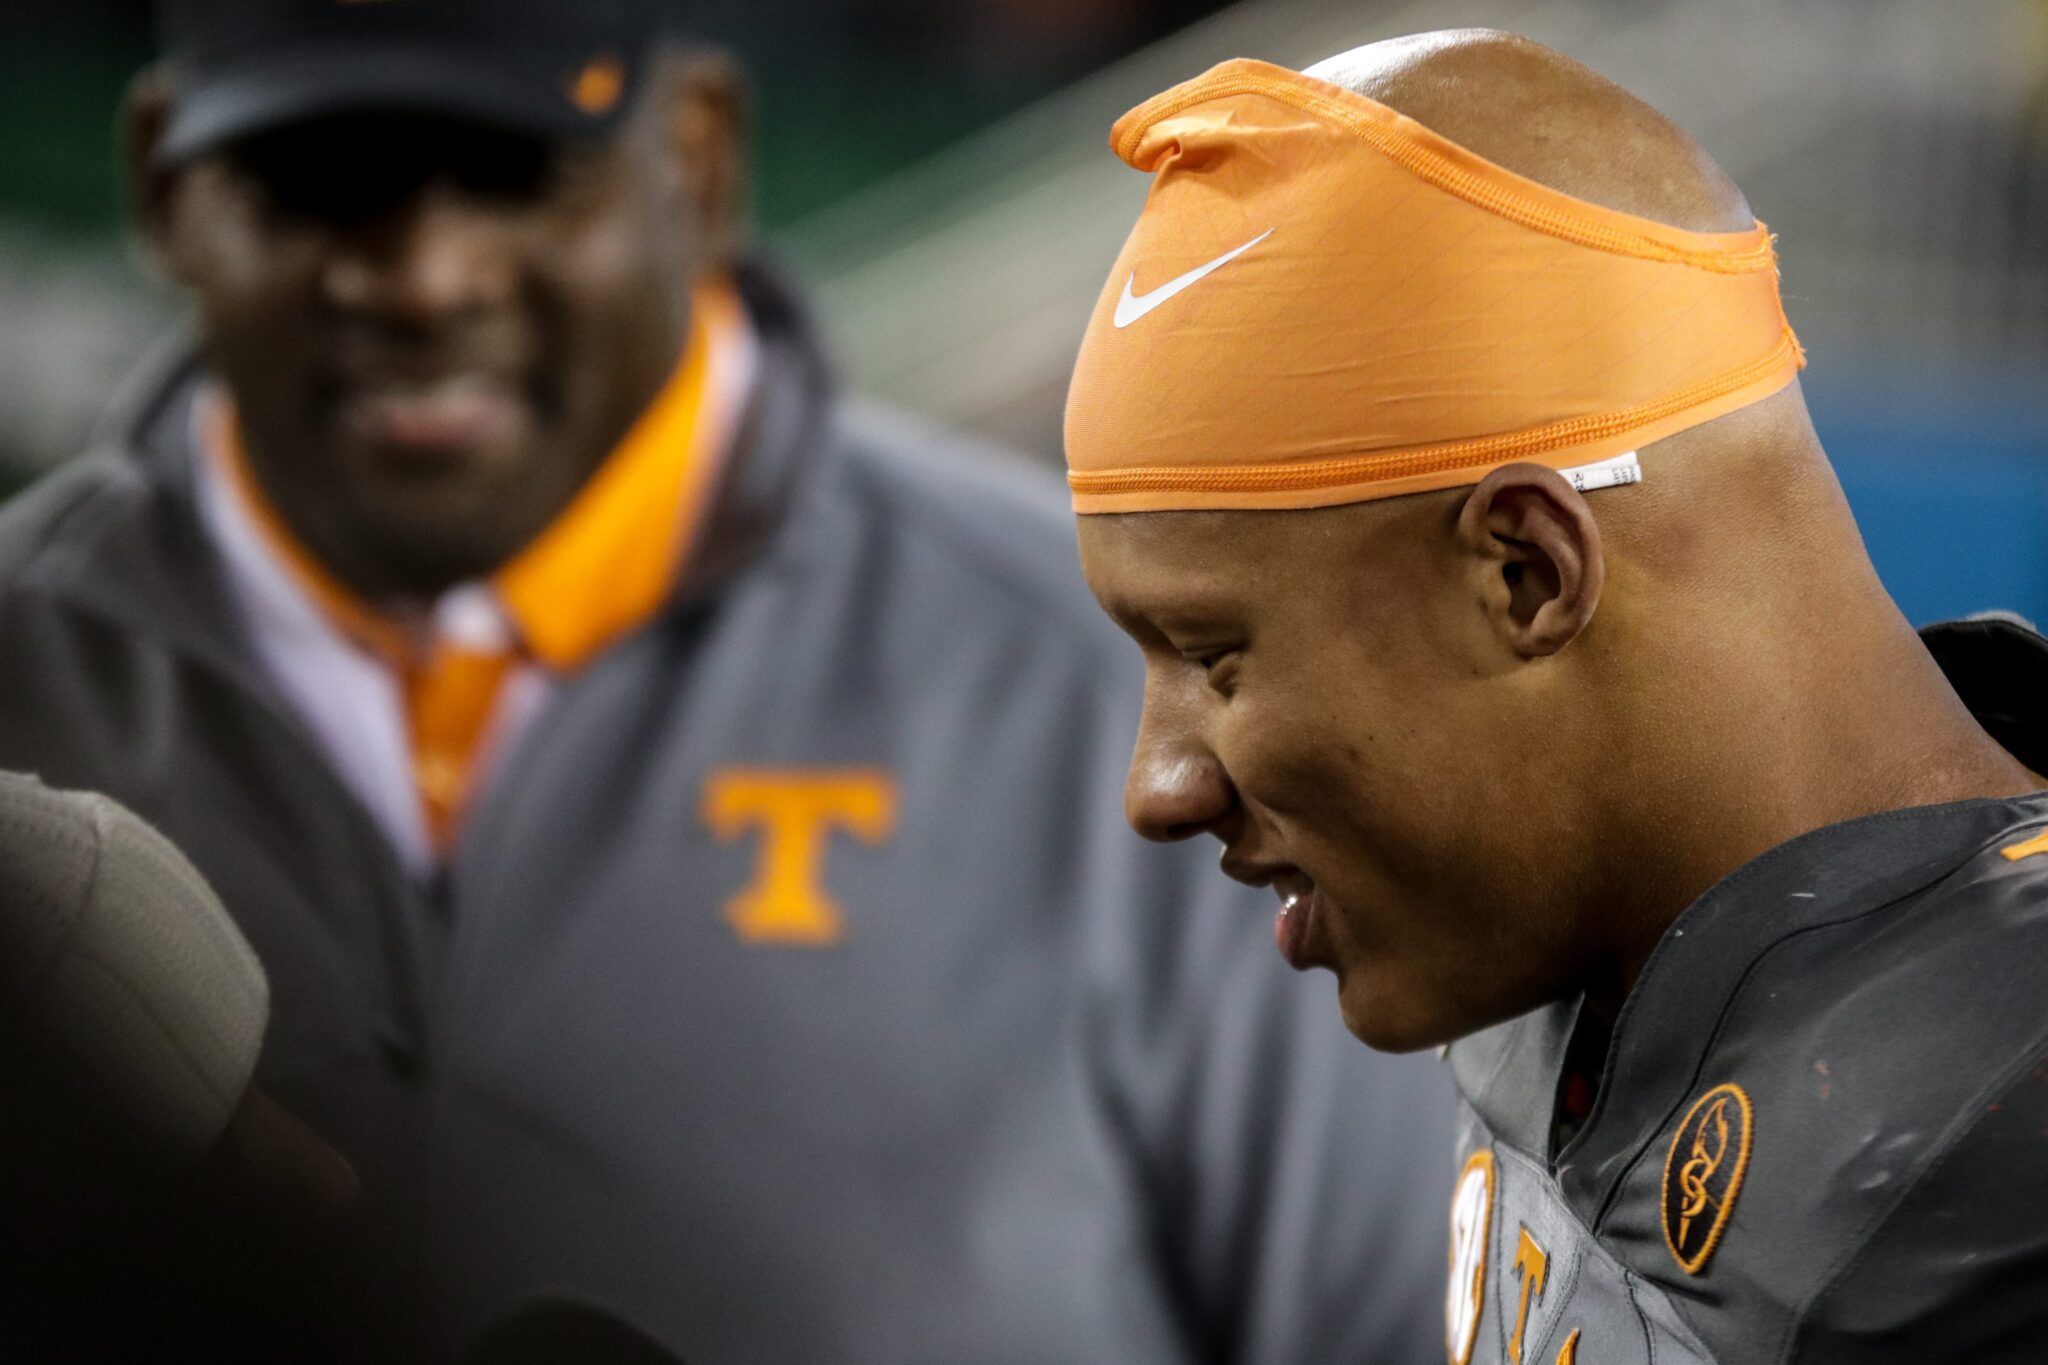 Ex-Tennessee Vols QB Joshua Dobbs takes over Steelers offense in